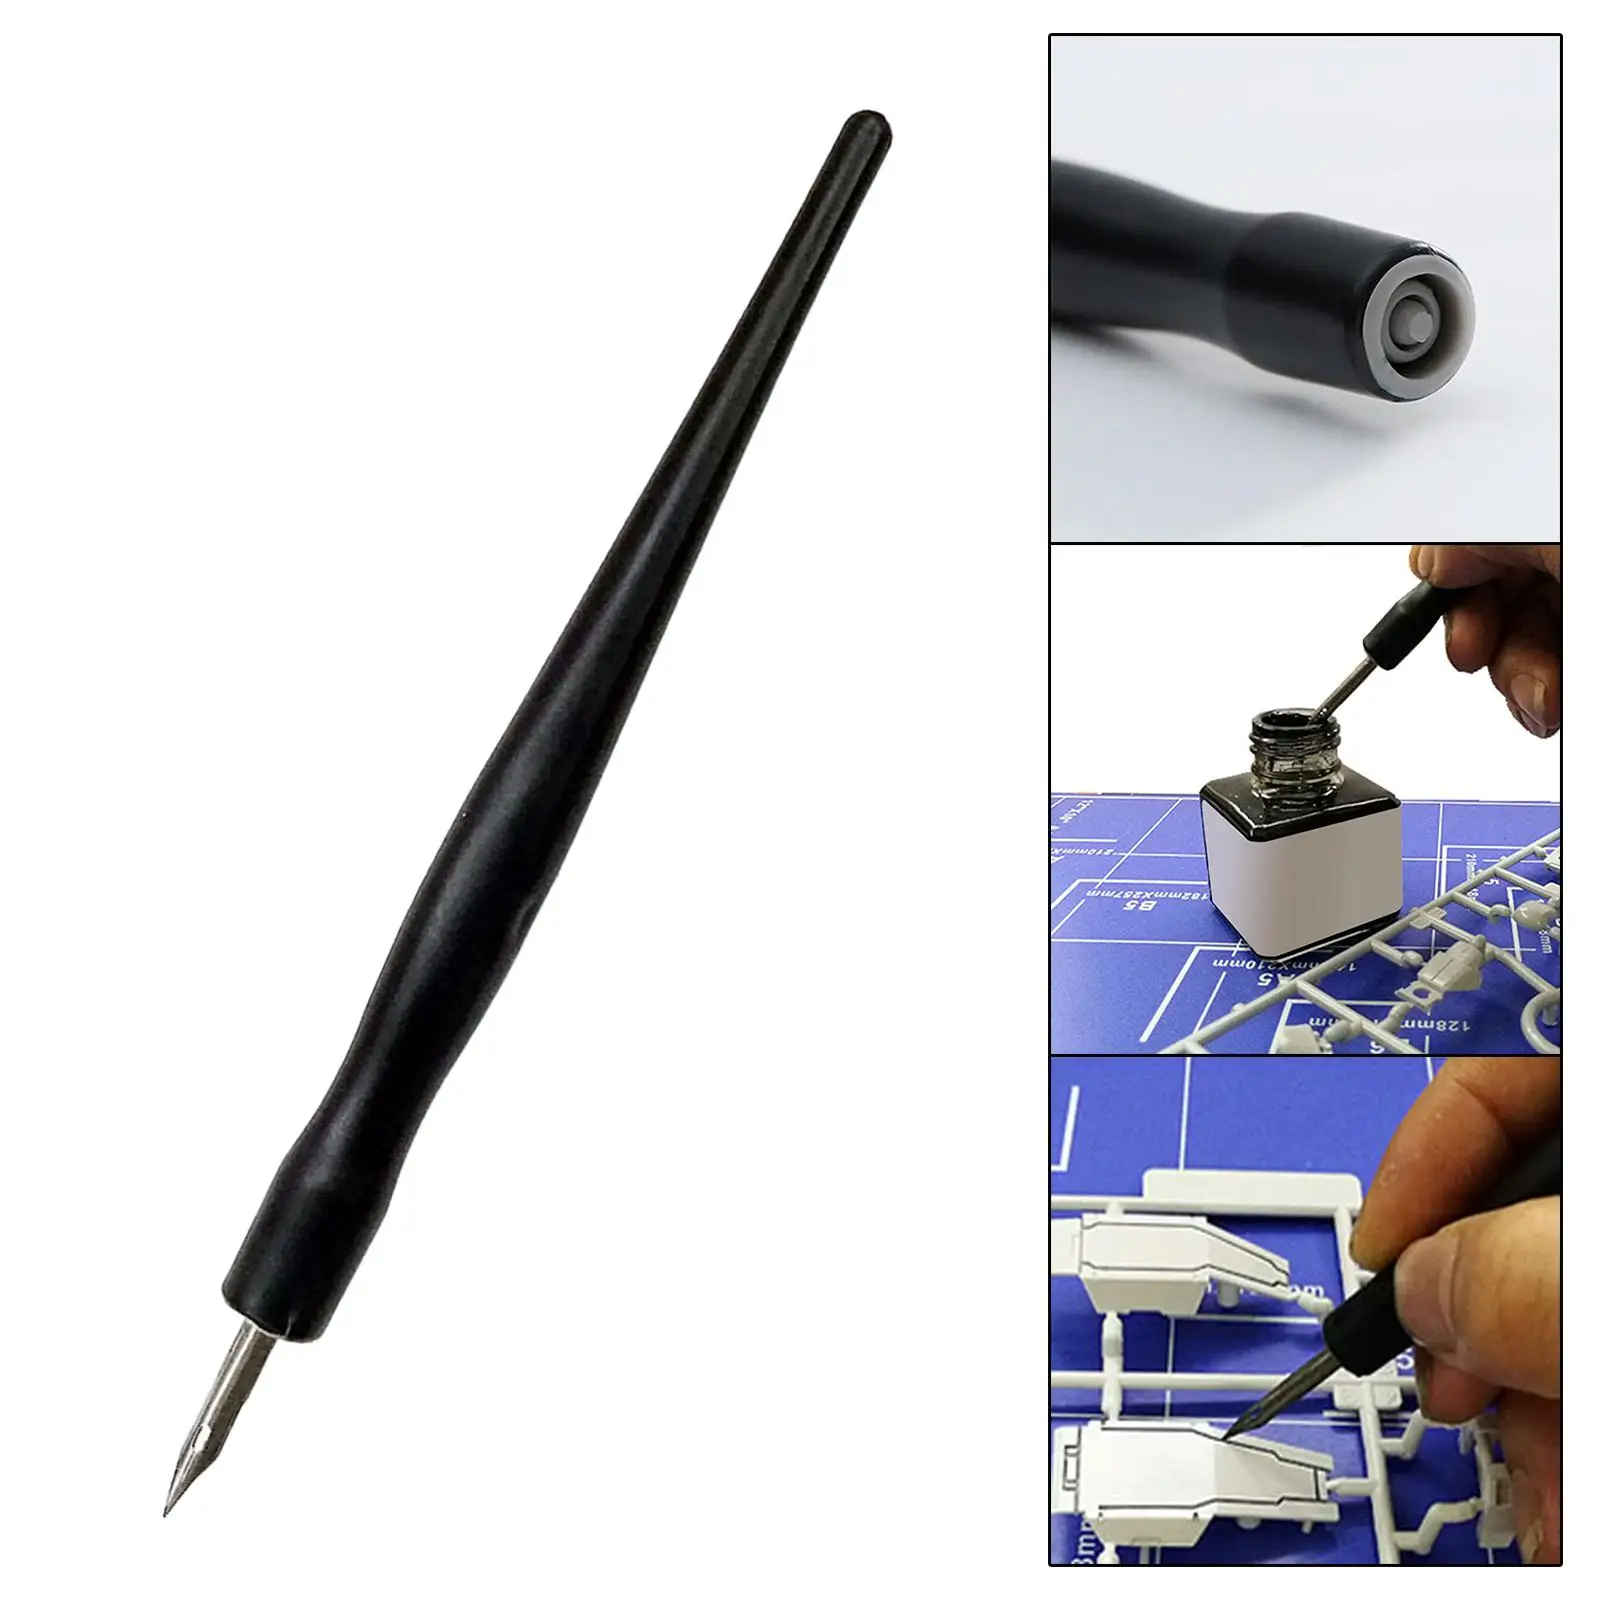 Panel Line Accent Pen Infiltration Line Permeation Pen Avoid Scrubbing Model Painting DIY Crafts